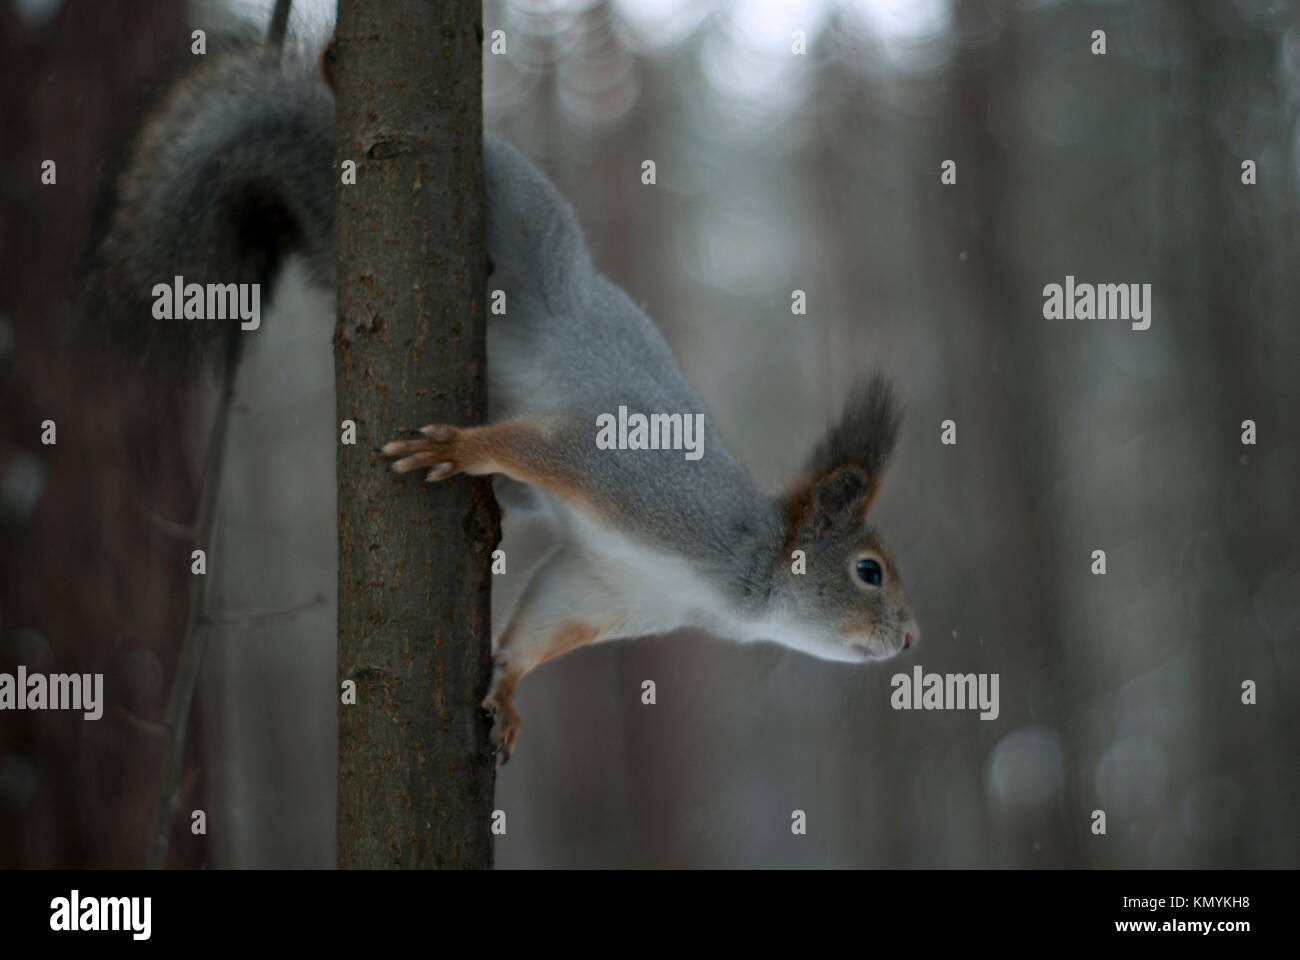 Eurasian red squirrel in grey winter coat with ear-tufts is about to jump, descending headlong over a thin tree against the background of a blurred wi Stock Photo